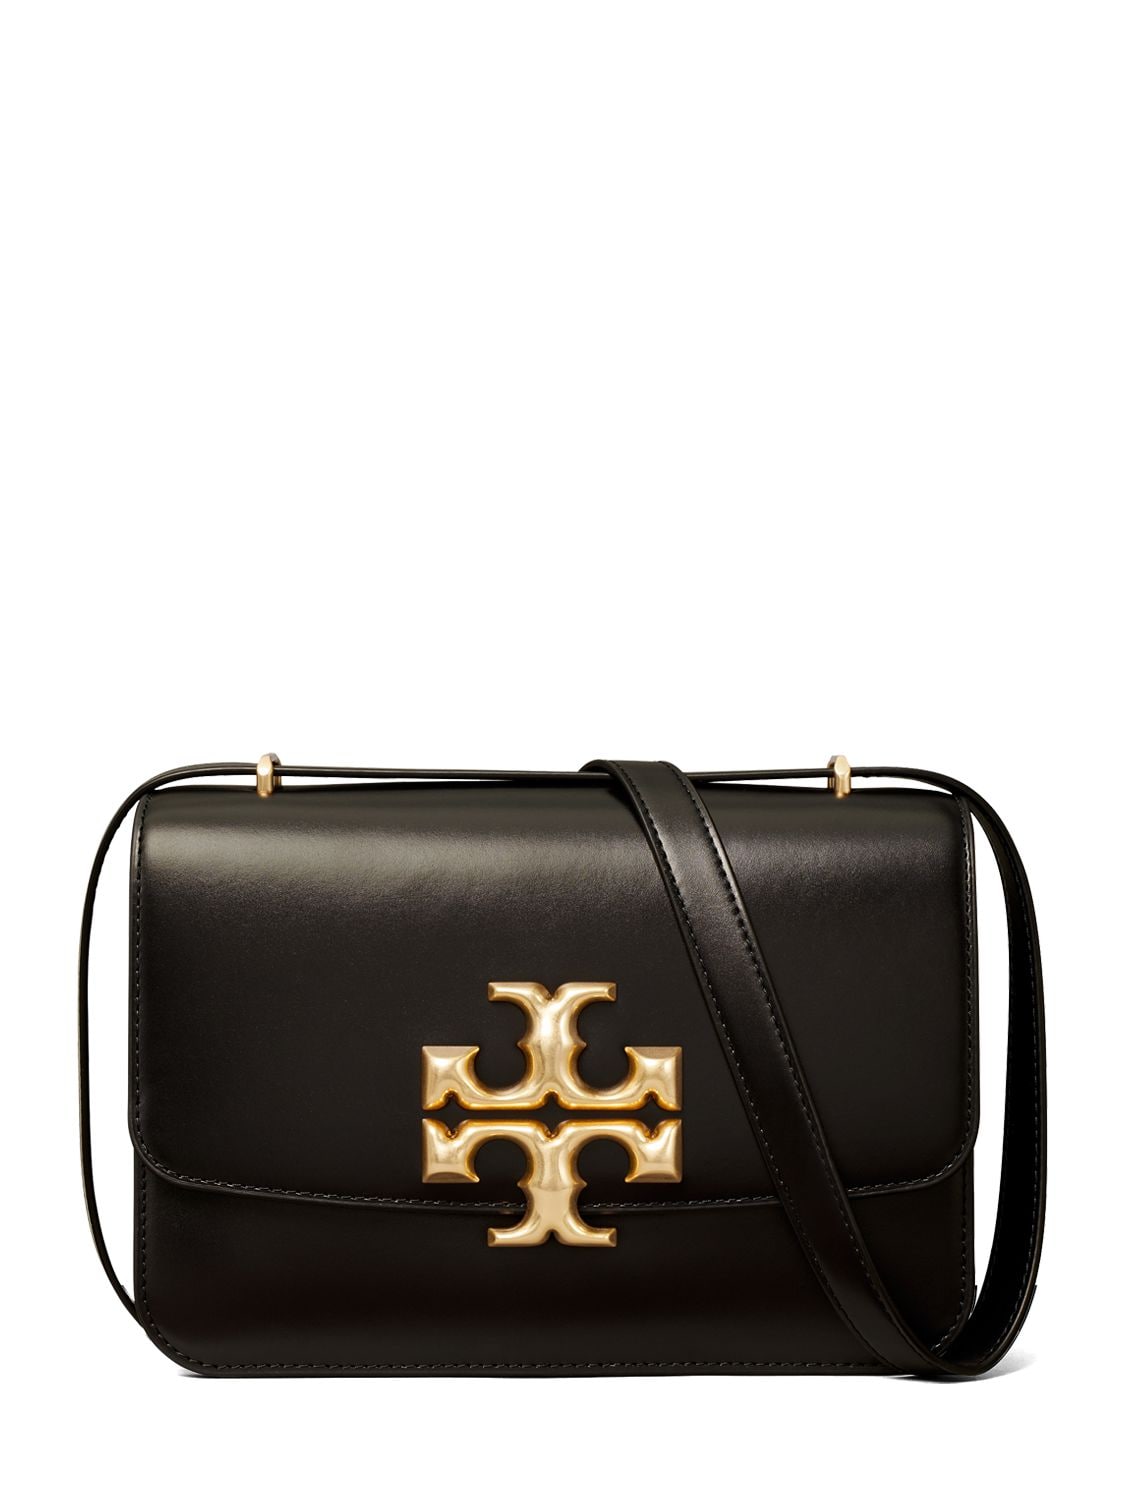 TORY BURCH ELEANOR CONVERTIBLE LEATHER BAG